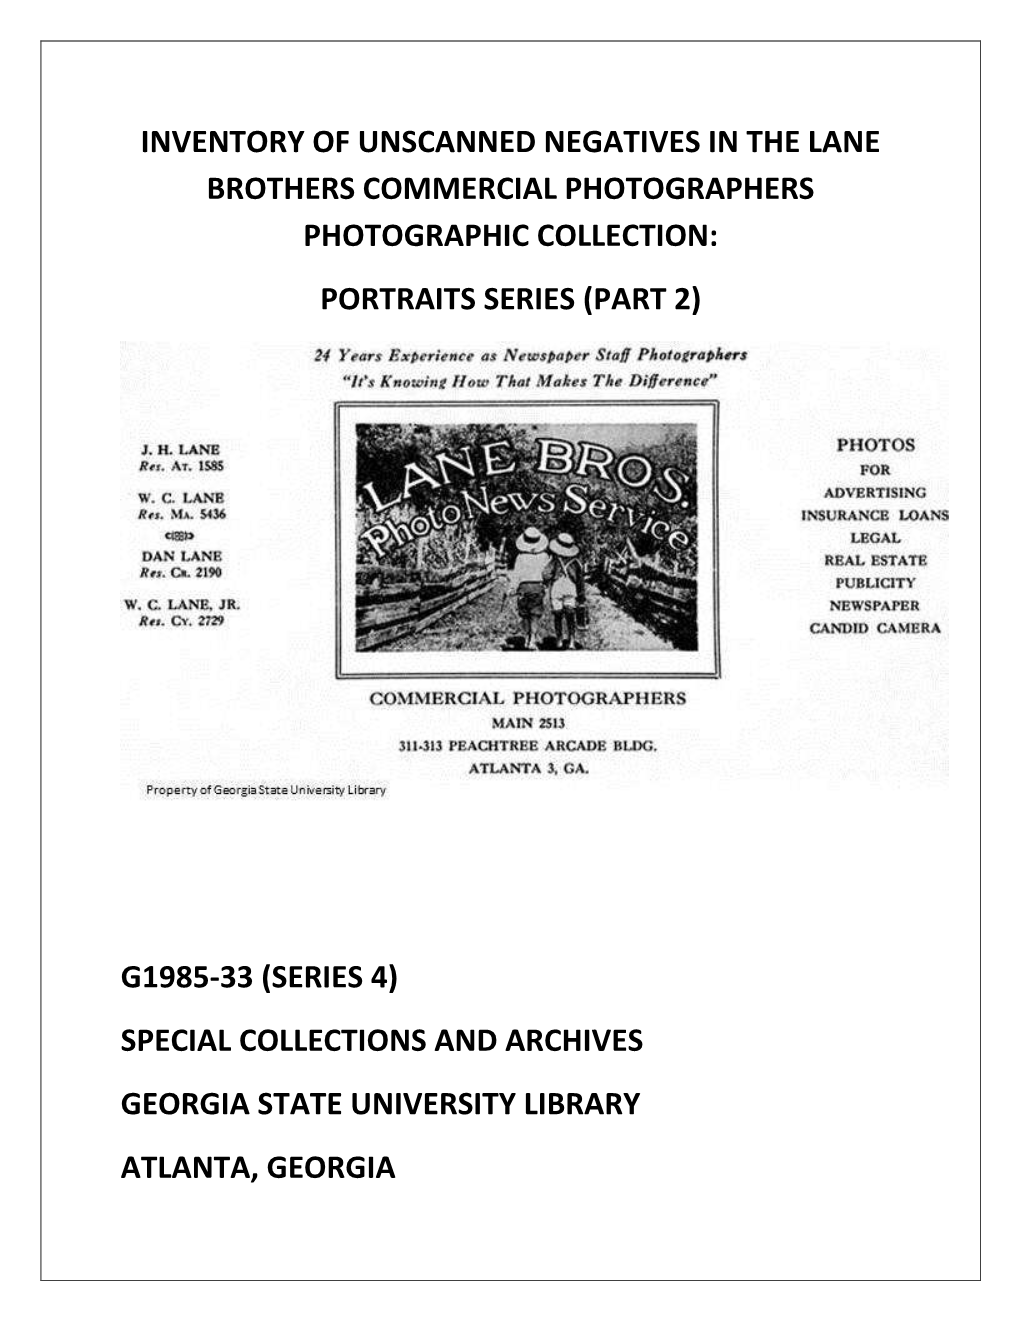 Inventory of Unscanned Negatives in the Lane Brothers Commercial Photographers Photographic Collection: Portraits Series (Part 2)